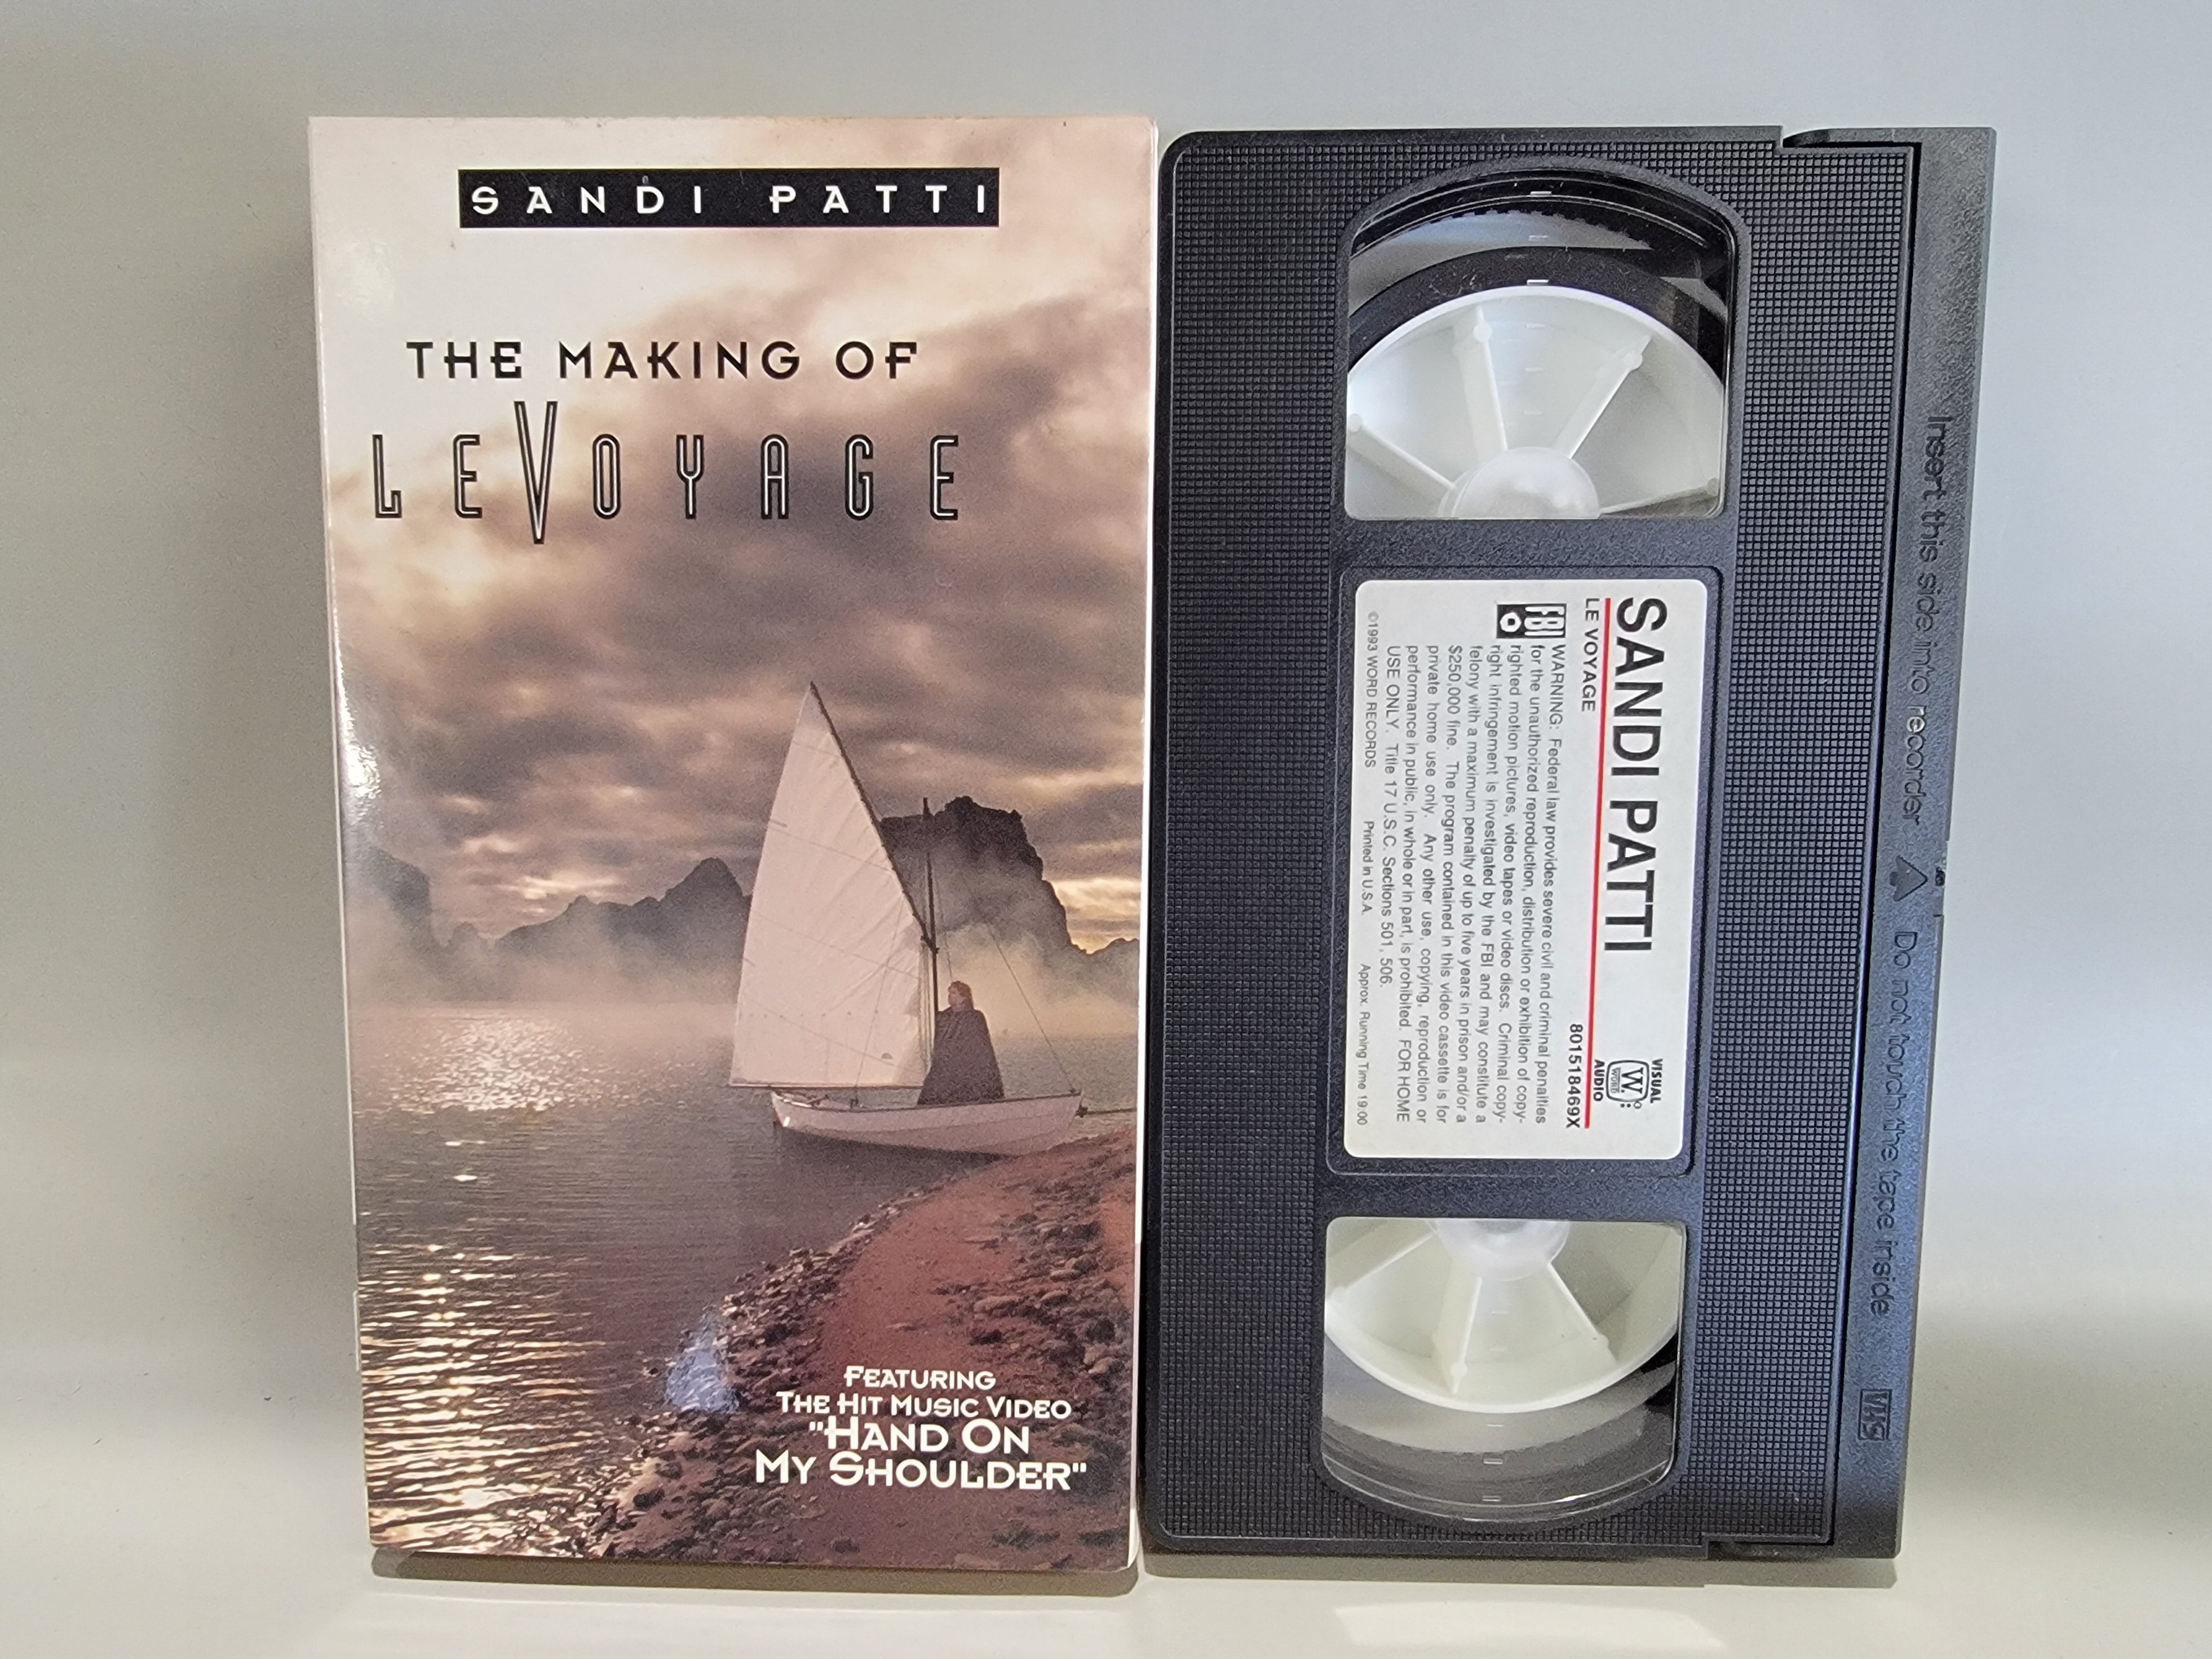 SANDI PATTI: THE MAKING OF LE VOYAGE VHS [USED]